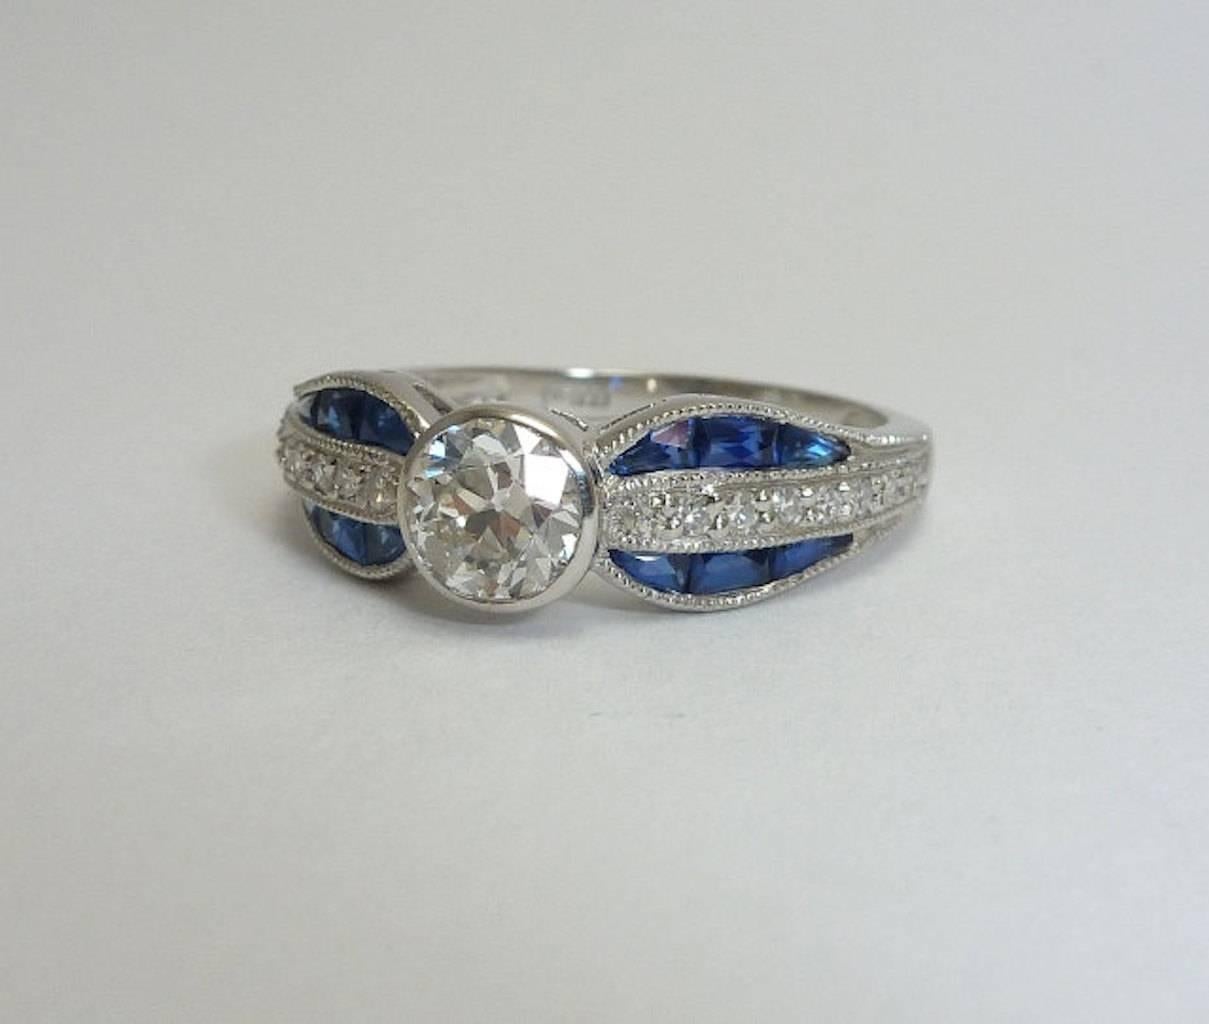 Handmade Sapphire, European Cut Diamond Bow Ring in Platinum In Excellent Condition For Sale In Boston, MA